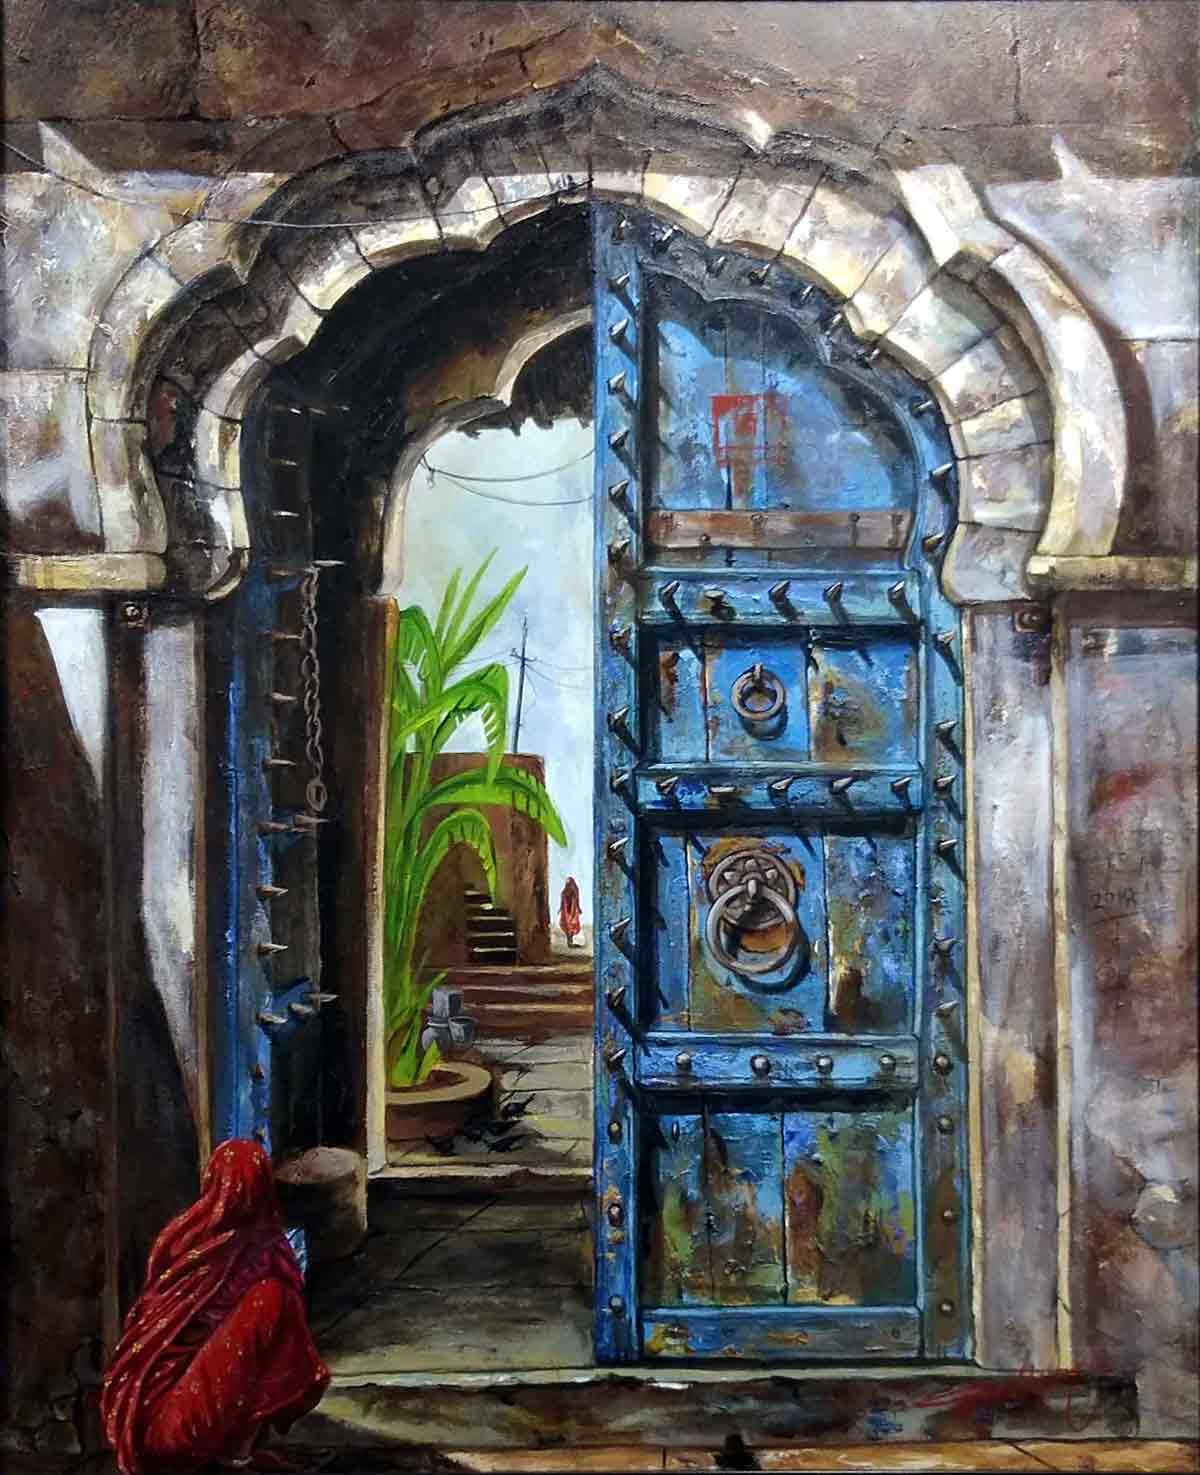 Realism Painting with Acrylic on Canvas "Blue Door" art by Ghanshyam Kashyap